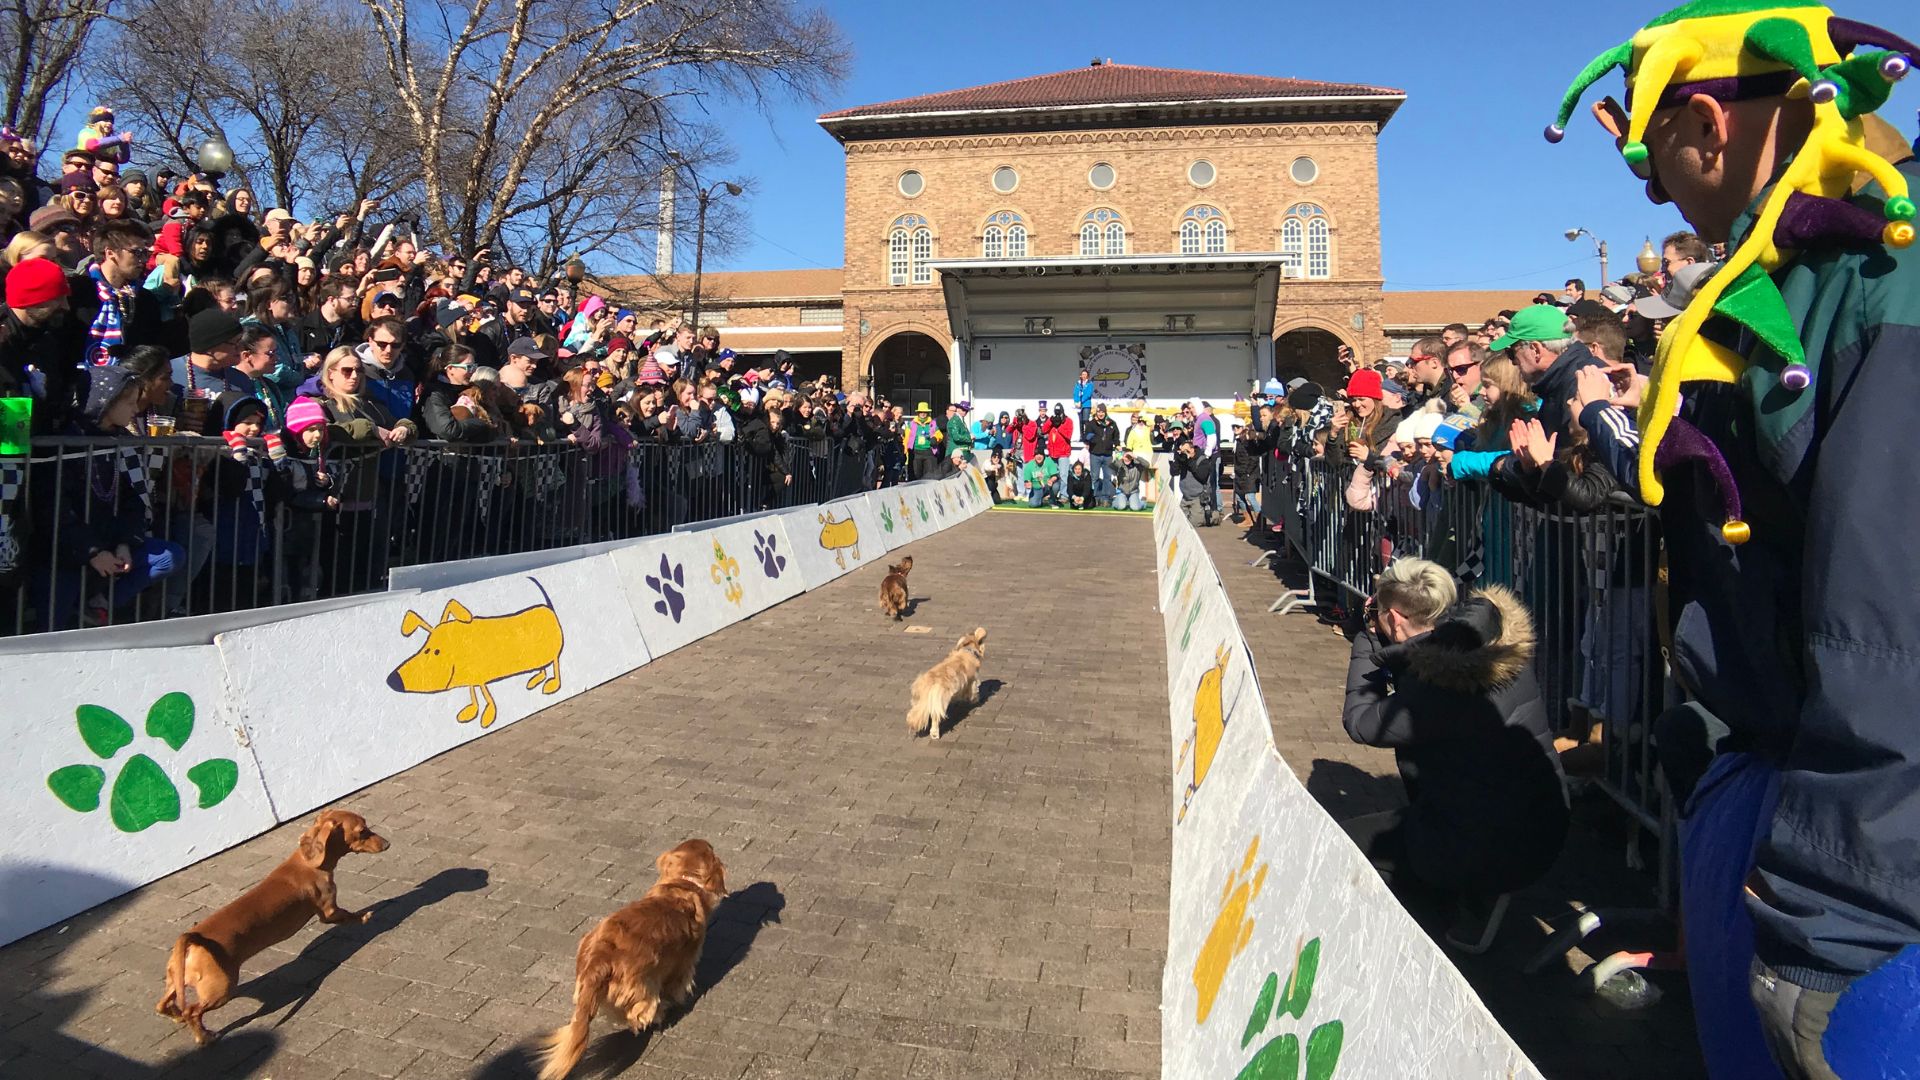 The nation’s longest-running wiener dog derby takes place in Soulard Market Park during Mardi Gras in St. Louis.